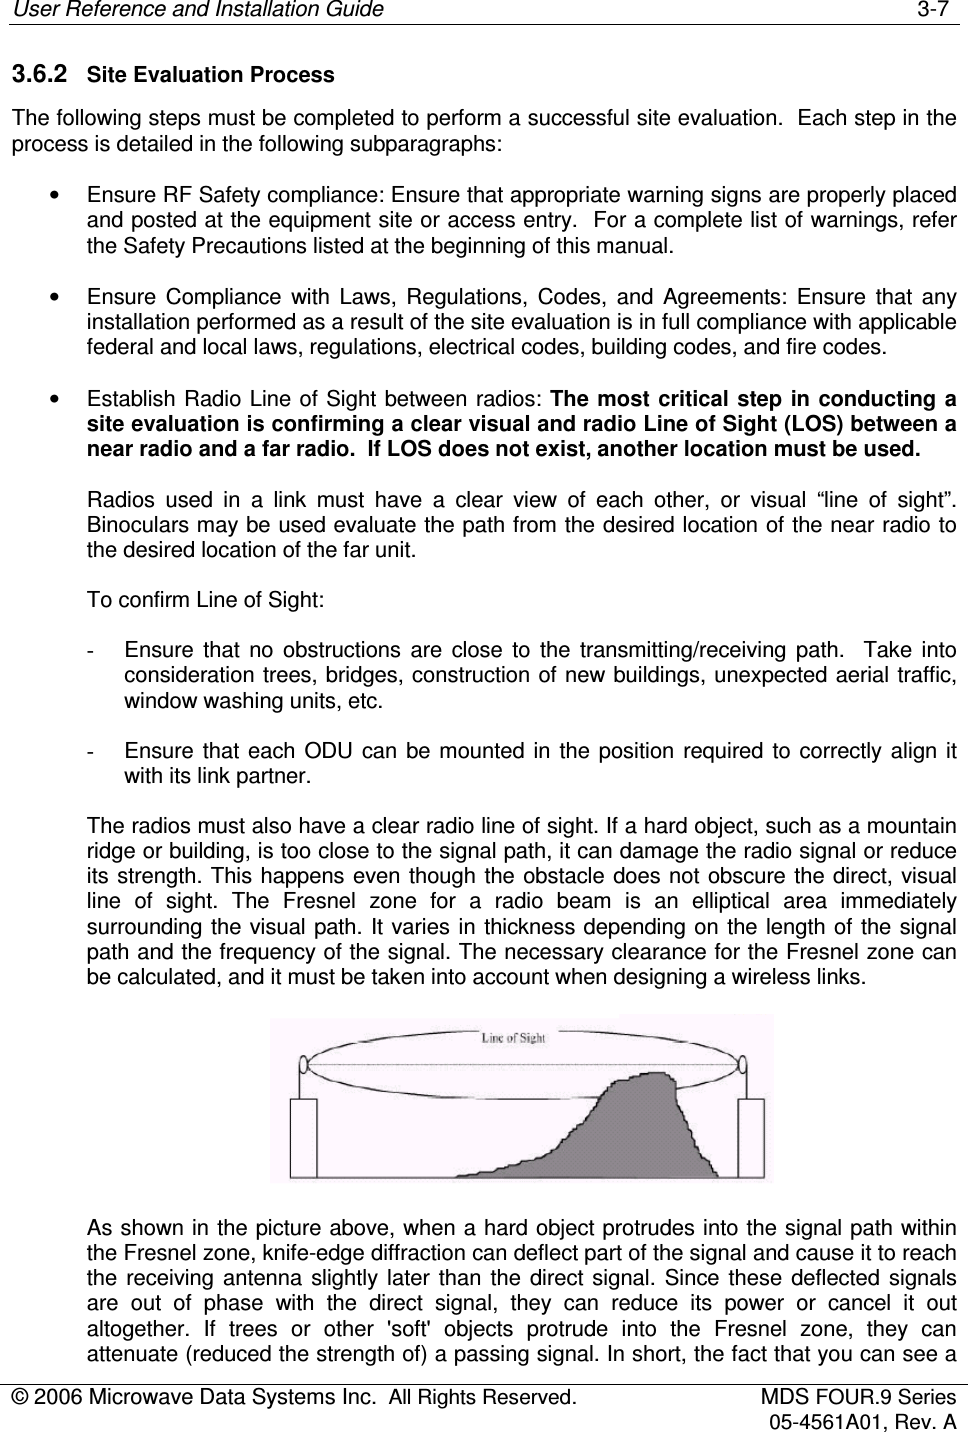 User Reference and Installation Guide    3-7 © 2006 Microwave Data Systems Inc.  All Rights Reserved.  MDS FOUR.9 Series 05-4561A01, Rev. A  3.6.2  Site Evaluation Process The following steps must be completed to perform a successful site evaluation.  Each step in the process is detailed in the following subparagraphs: •  Ensure RF Safety compliance: Ensure that appropriate warning signs are properly placed and posted at the equipment site or access entry.  For a complete list of warnings, refer the Safety Precautions listed at the beginning of this manual. •  Ensure  Compliance  with  Laws,  Regulations,  Codes,  and  Agreements:  Ensure  that  any installation performed as a result of the site evaluation is in full compliance with applicable federal and local laws, regulations, electrical codes, building codes, and fire codes. •  Establish Radio Line of Sight between radios: The most critical step in conducting a site evaluation is confirming a clear visual and radio Line of Sight (LOS) between a near radio and a far radio.  If LOS does not exist, another location must be used. Radios  used  in  a  link  must  have  a  clear  view  of  each  other,  or  visual  “line  of  sight”.  Binoculars may be used evaluate the path from the desired location of the near radio to the desired location of the far unit. To confirm Line of Sight: -  Ensure  that  no  obstructions  are  close  to  the  transmitting/receiving  path.    Take  into consideration trees, bridges, construction of new buildings, unexpected aerial traffic, window washing units, etc. -  Ensure  that  each  ODU  can  be mounted  in  the position  required  to  correctly  align it with its link partner. The radios must also have a clear radio line of sight. If a hard object, such as a mountain ridge or building, is too close to the signal path, it can damage the radio signal or reduce its strength. This happens even though the obstacle does not obscure the direct, visual line  of  sight.  The  Fresnel  zone  for  a  radio  beam  is  an  elliptical  area  immediately surrounding the visual path. It varies in thickness depending on the length of the signal path and the frequency of the signal. The necessary clearance for the Fresnel zone can be calculated, and it must be taken into account when designing a wireless links.   As shown in the picture above, when a hard object protrudes into the signal path within the Fresnel zone, knife-edge diffraction can deflect part of the signal and cause it to reach the  receiving  antenna slightly later  than  the  direct signal.  Since  these  deflected  signals are  out  of  phase  with  the  direct  signal,  they  can  reduce  its  power  or  cancel  it  out altogether.  If  trees  or  other  &apos;soft&apos;  objects  protrude  into  the  Fresnel  zone,  they  can attenuate (reduced the strength of) a passing signal. In short, the fact that you can see a 